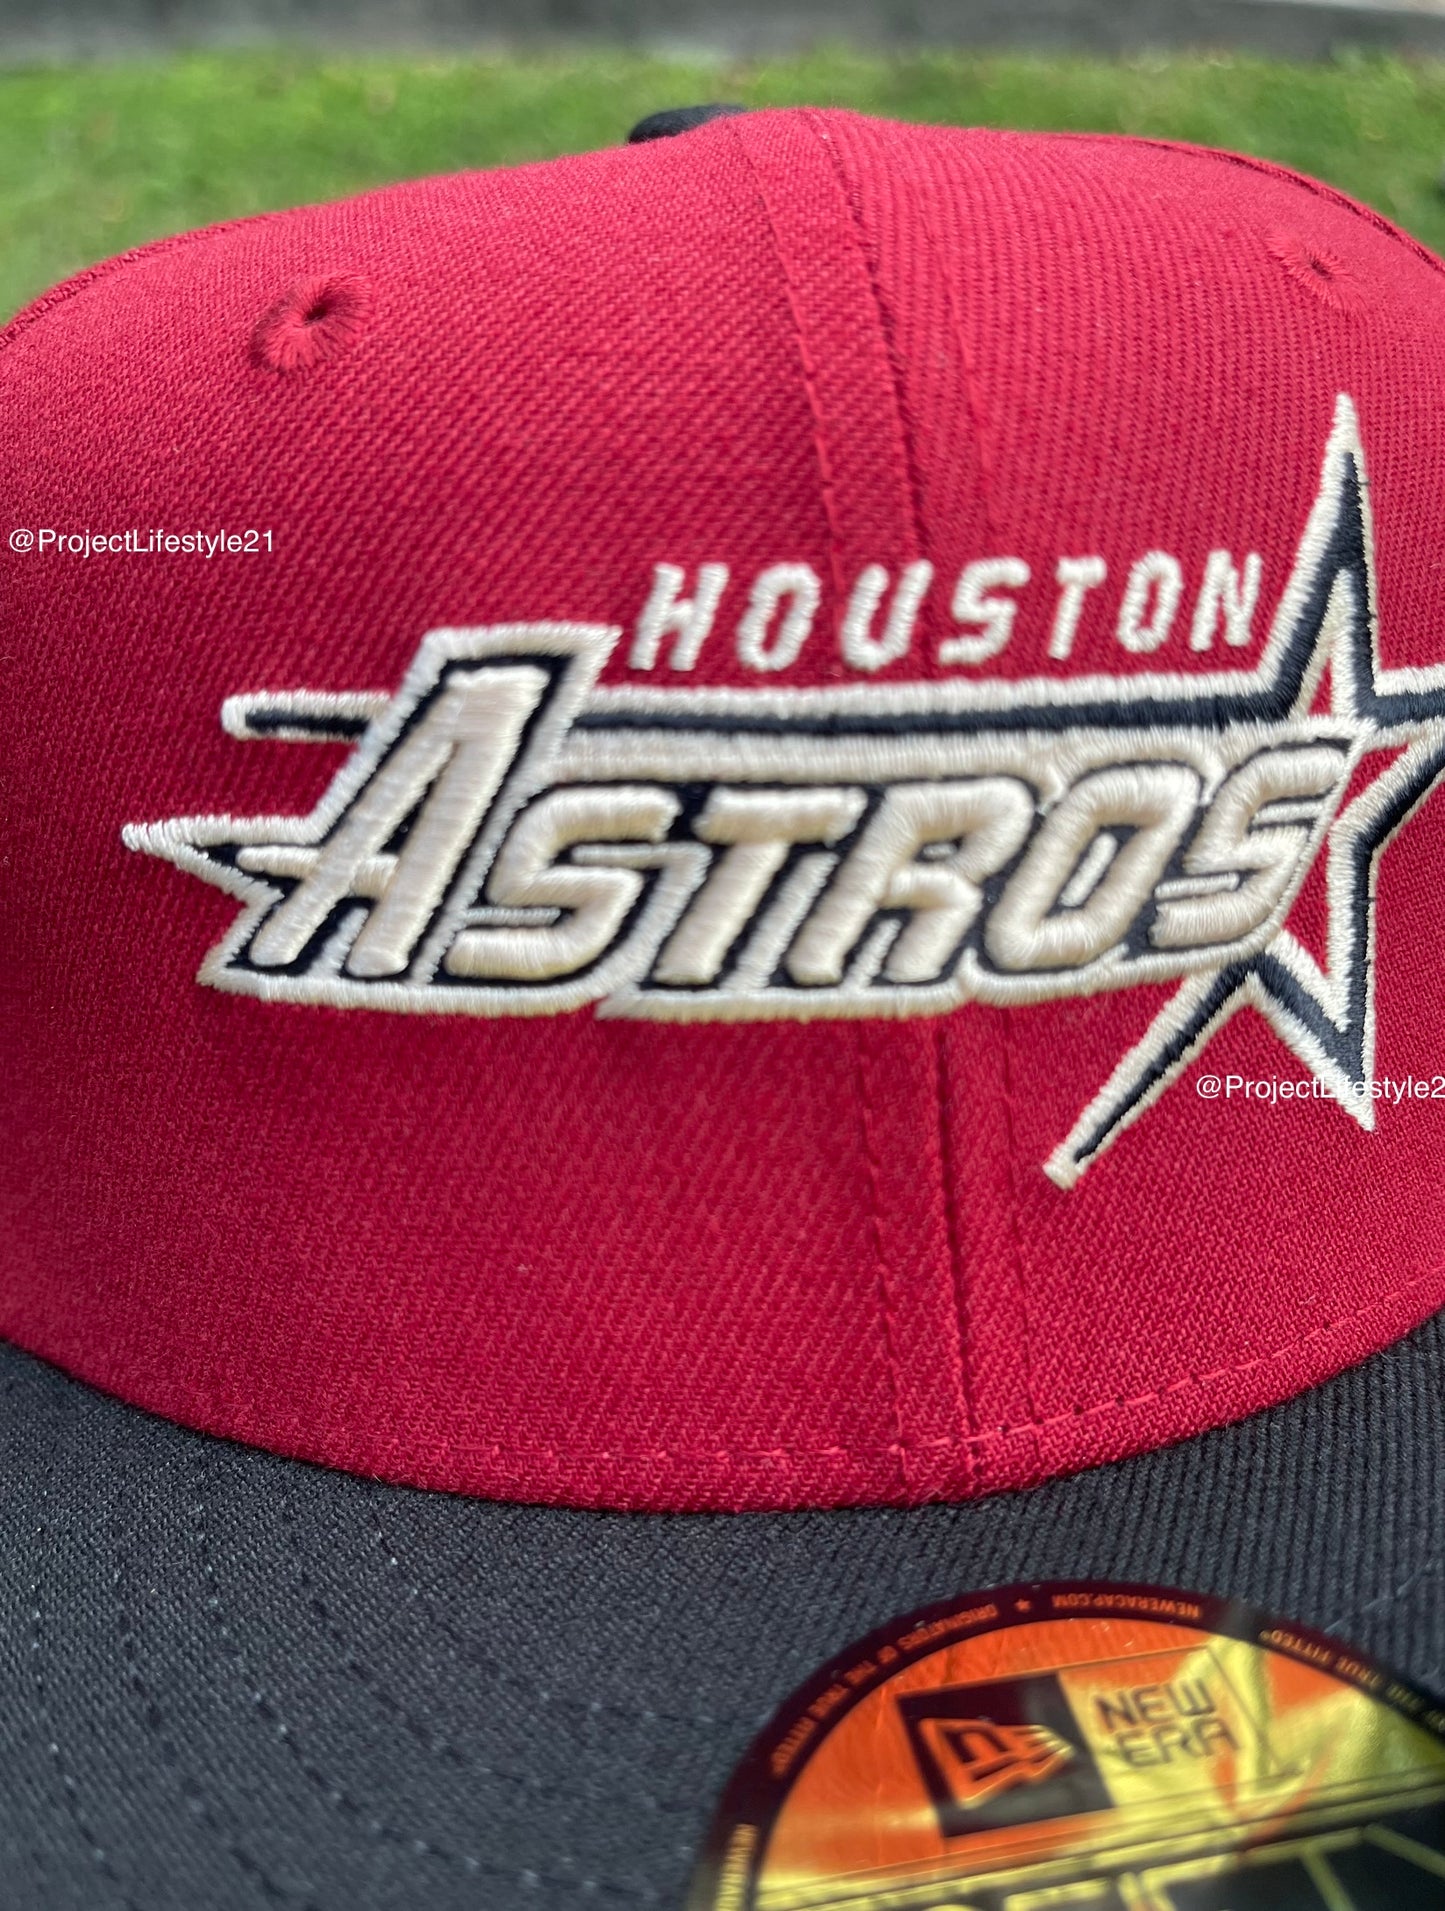 Houston Astros Astrodome Patch Fitted Hat (Brick Red/Black)